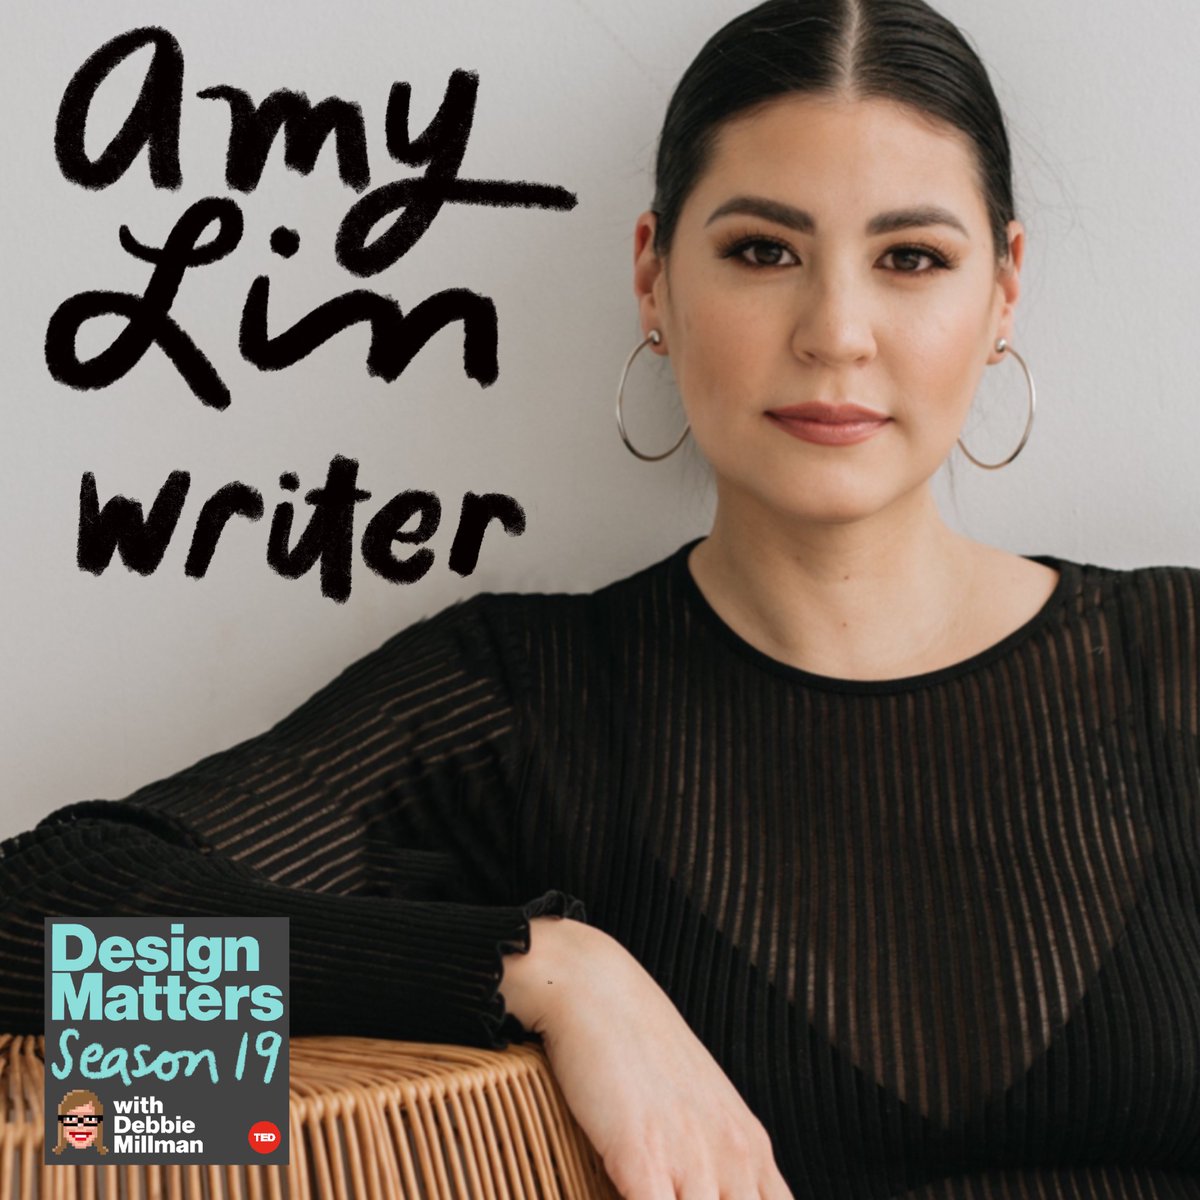 Writer Amy Lin deconstructs grief in her new memoir ‘Here After,’ a beautifully visceral and emotionally intimate depiction of young widowhood. She joins to discuss the science of grief and how she coped in the wake of her inexplicable loss. apple.co/3Ucx7BM